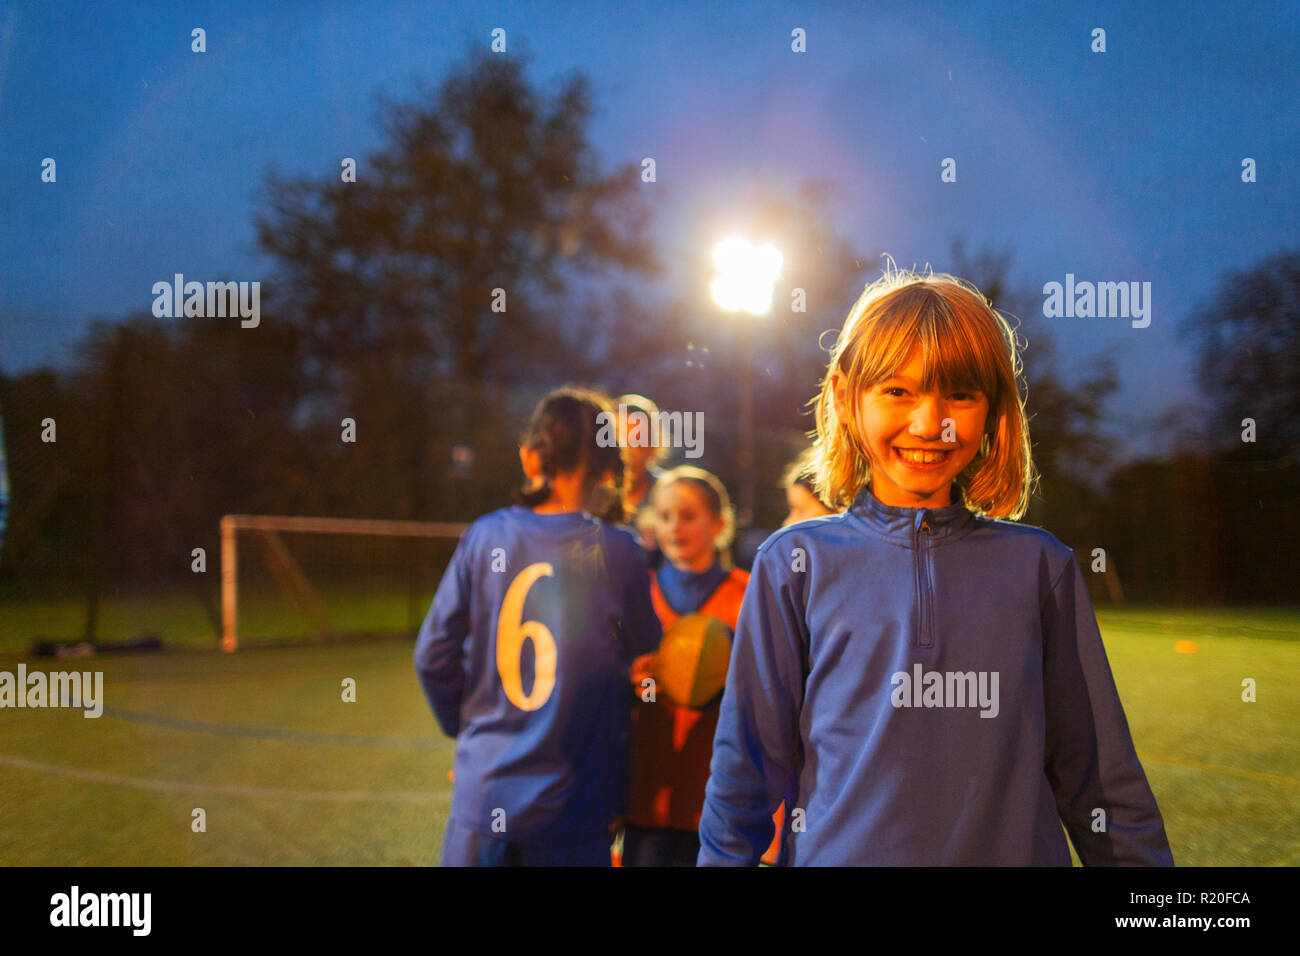 Portrait confident girl playing soccer with team on field at night Stock Photo